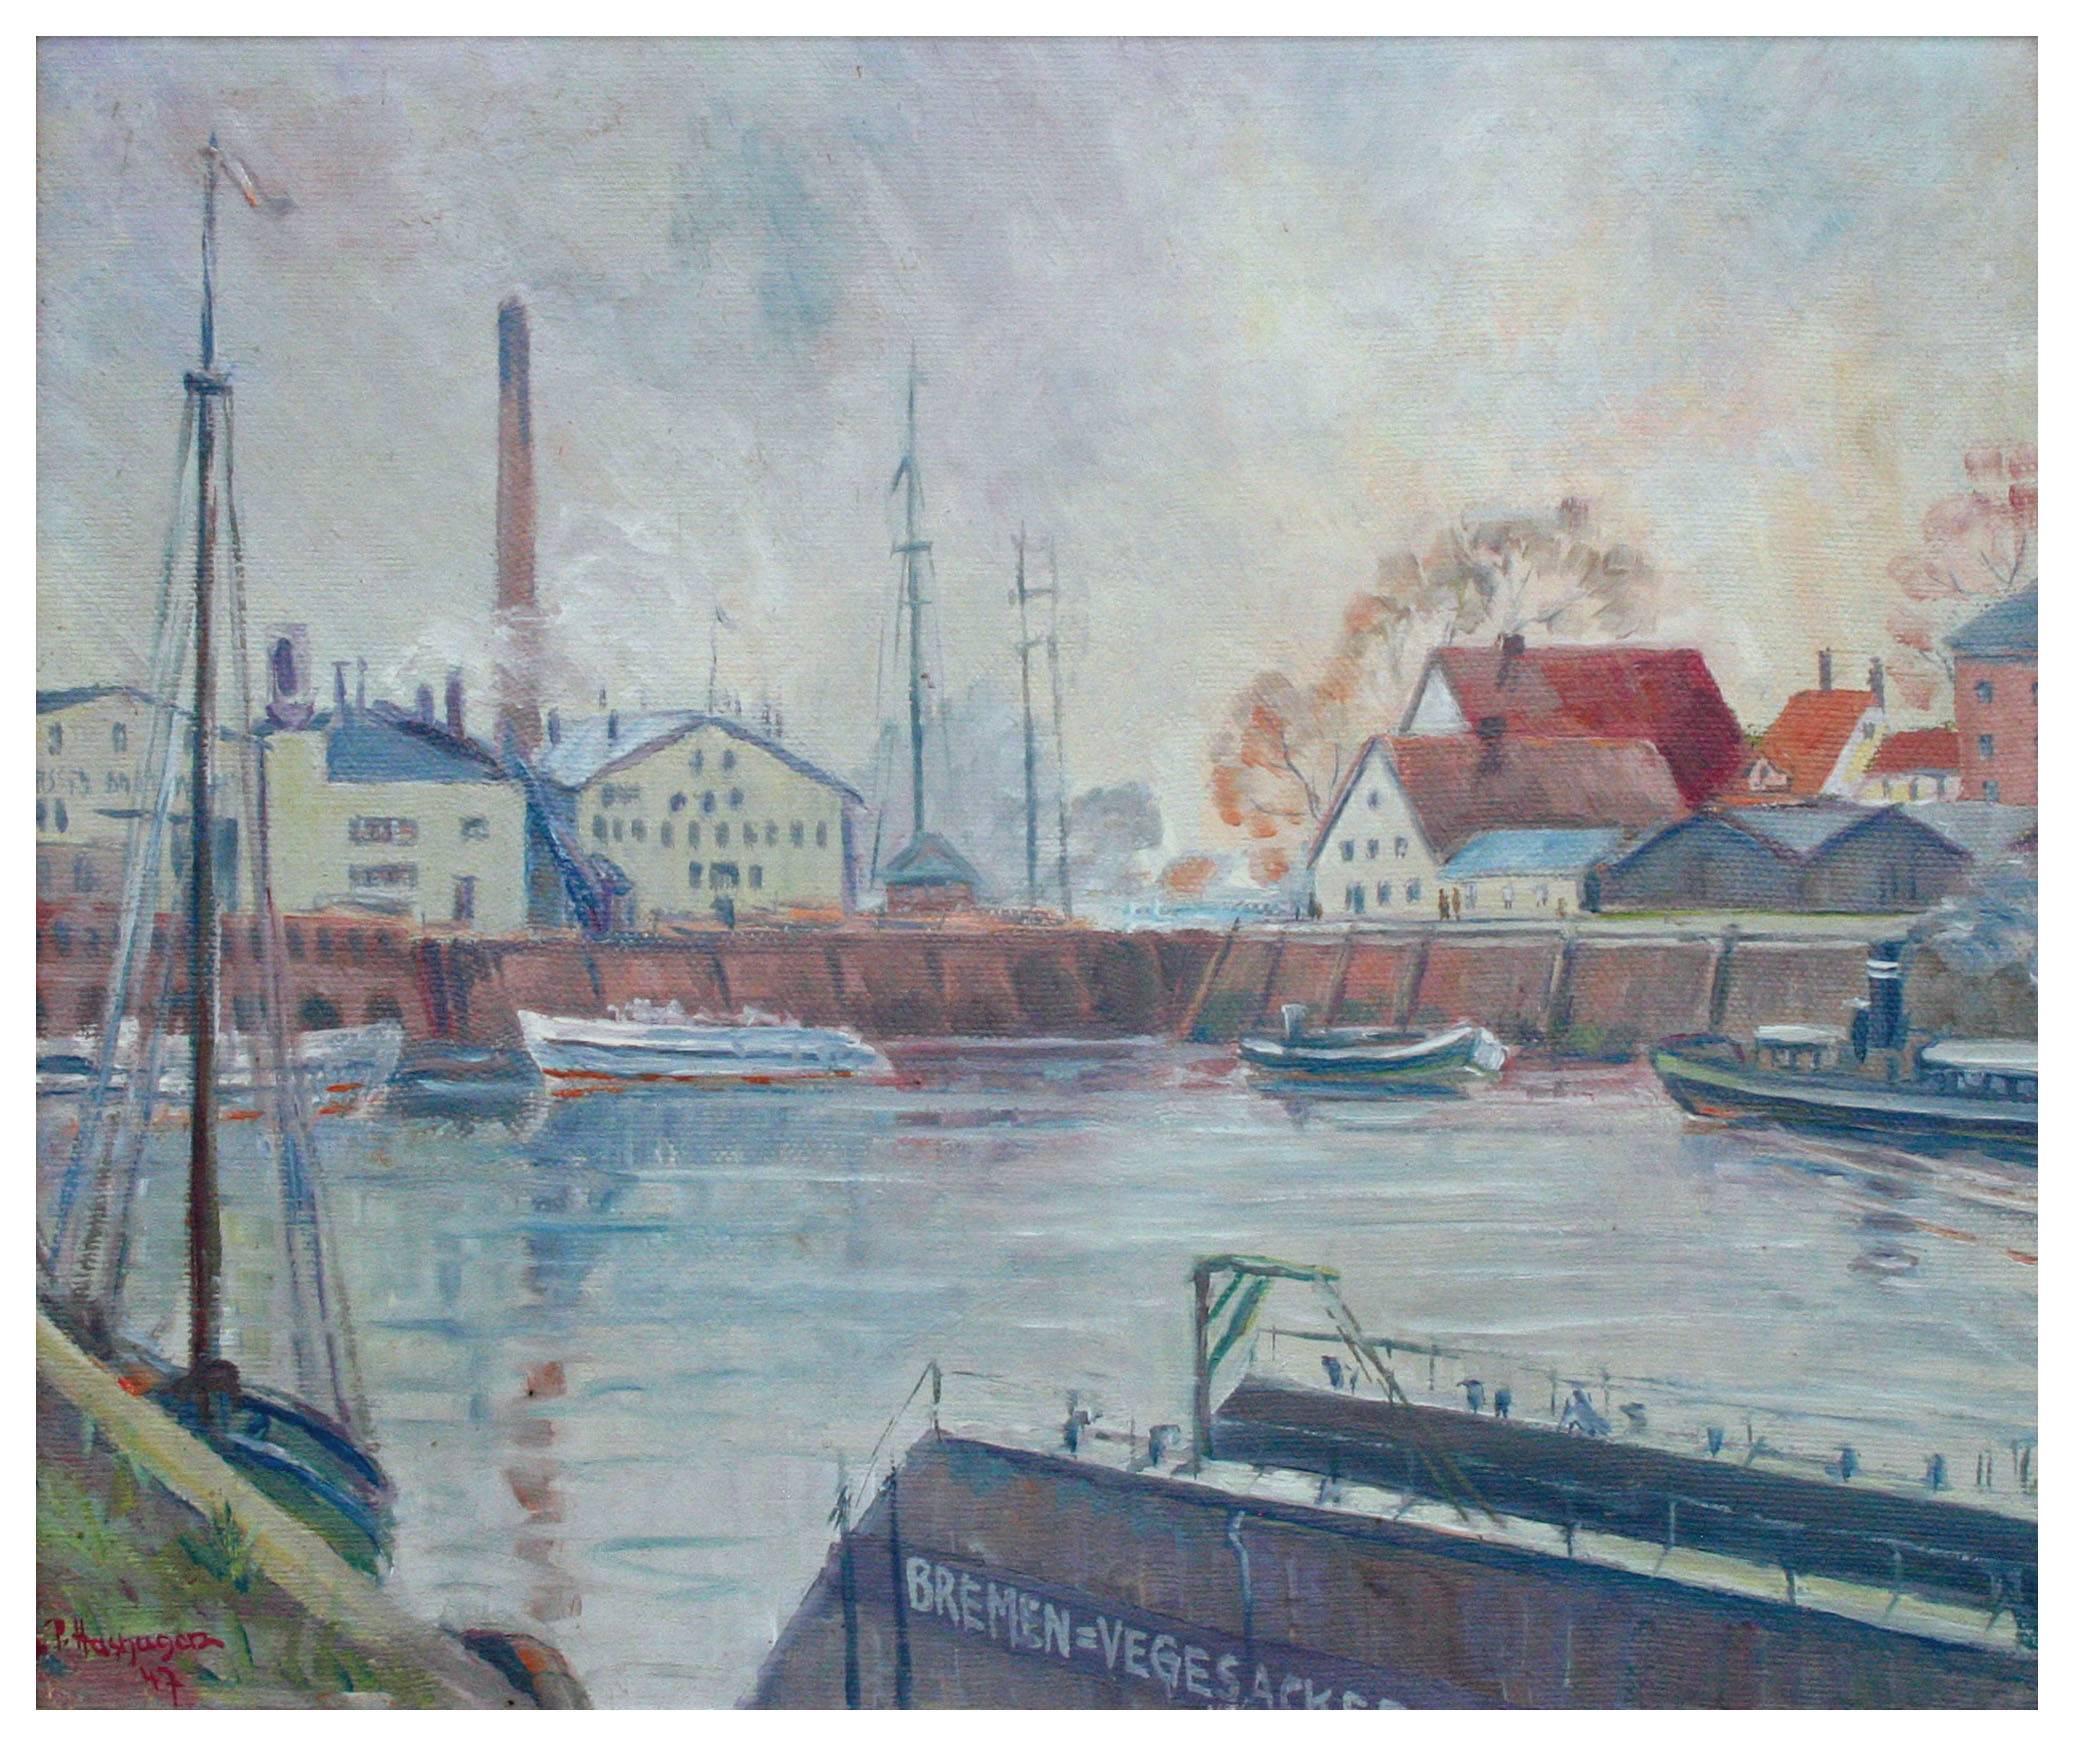 Boats in the Harbor - Mid Century Industrial Seascape  - Painting by Pieter Hashager